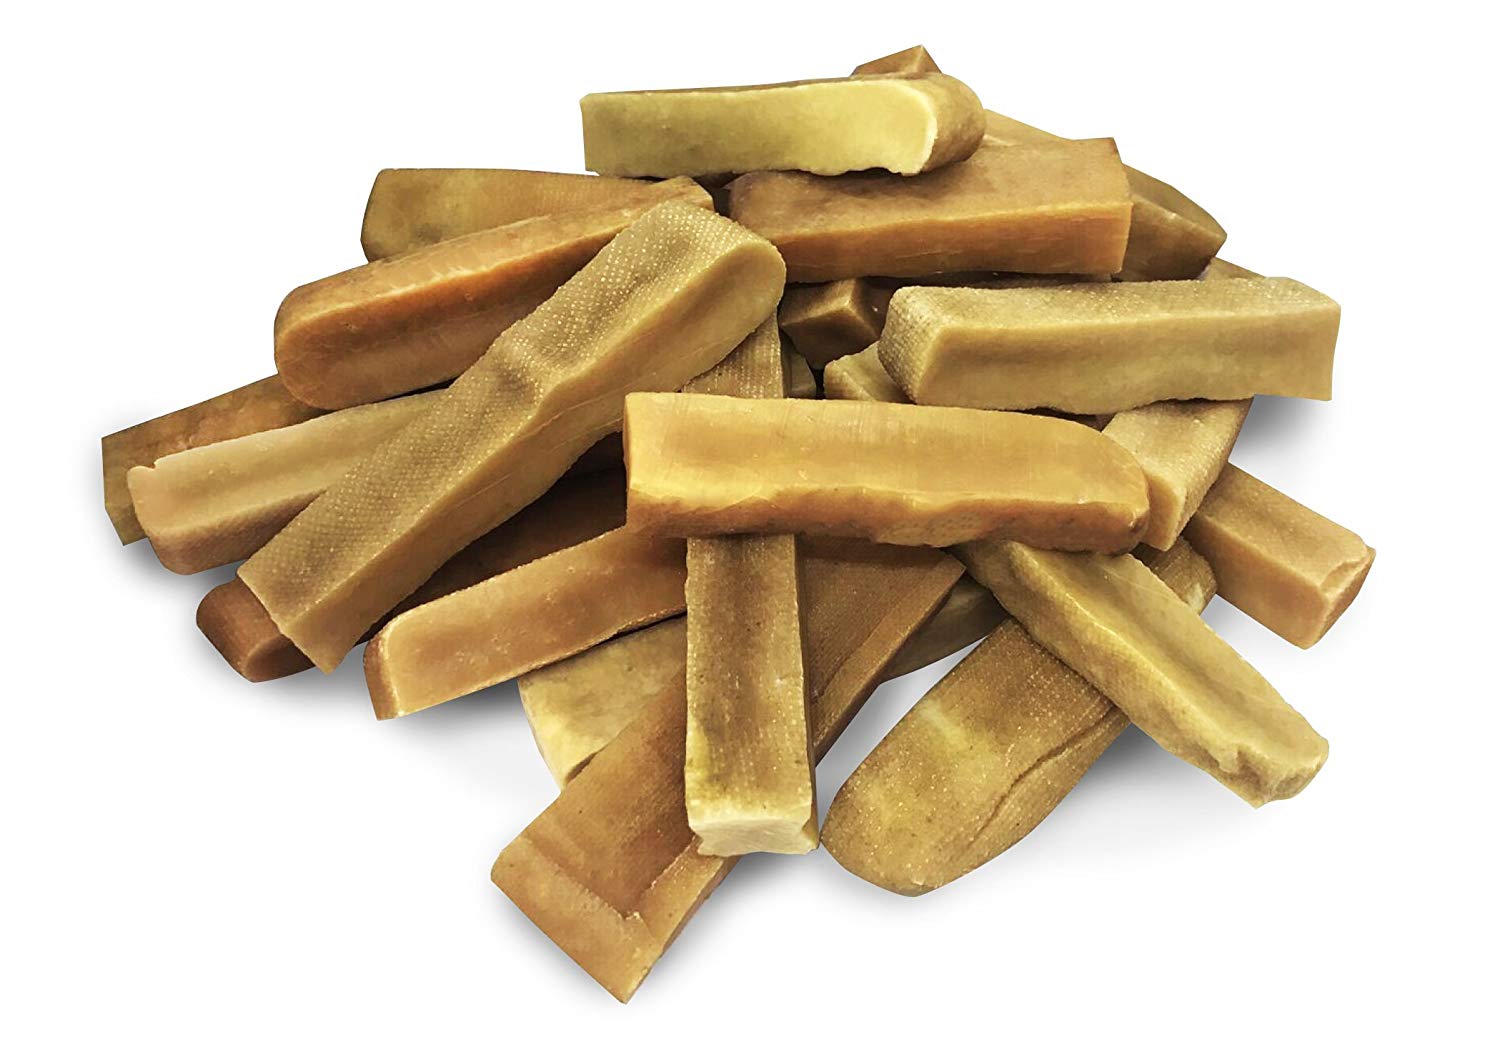 a pile of Large EcoKind Himalayan Yak Chew Treats - Long Lasting, Grain-Free Chews for Dogs and Puppies